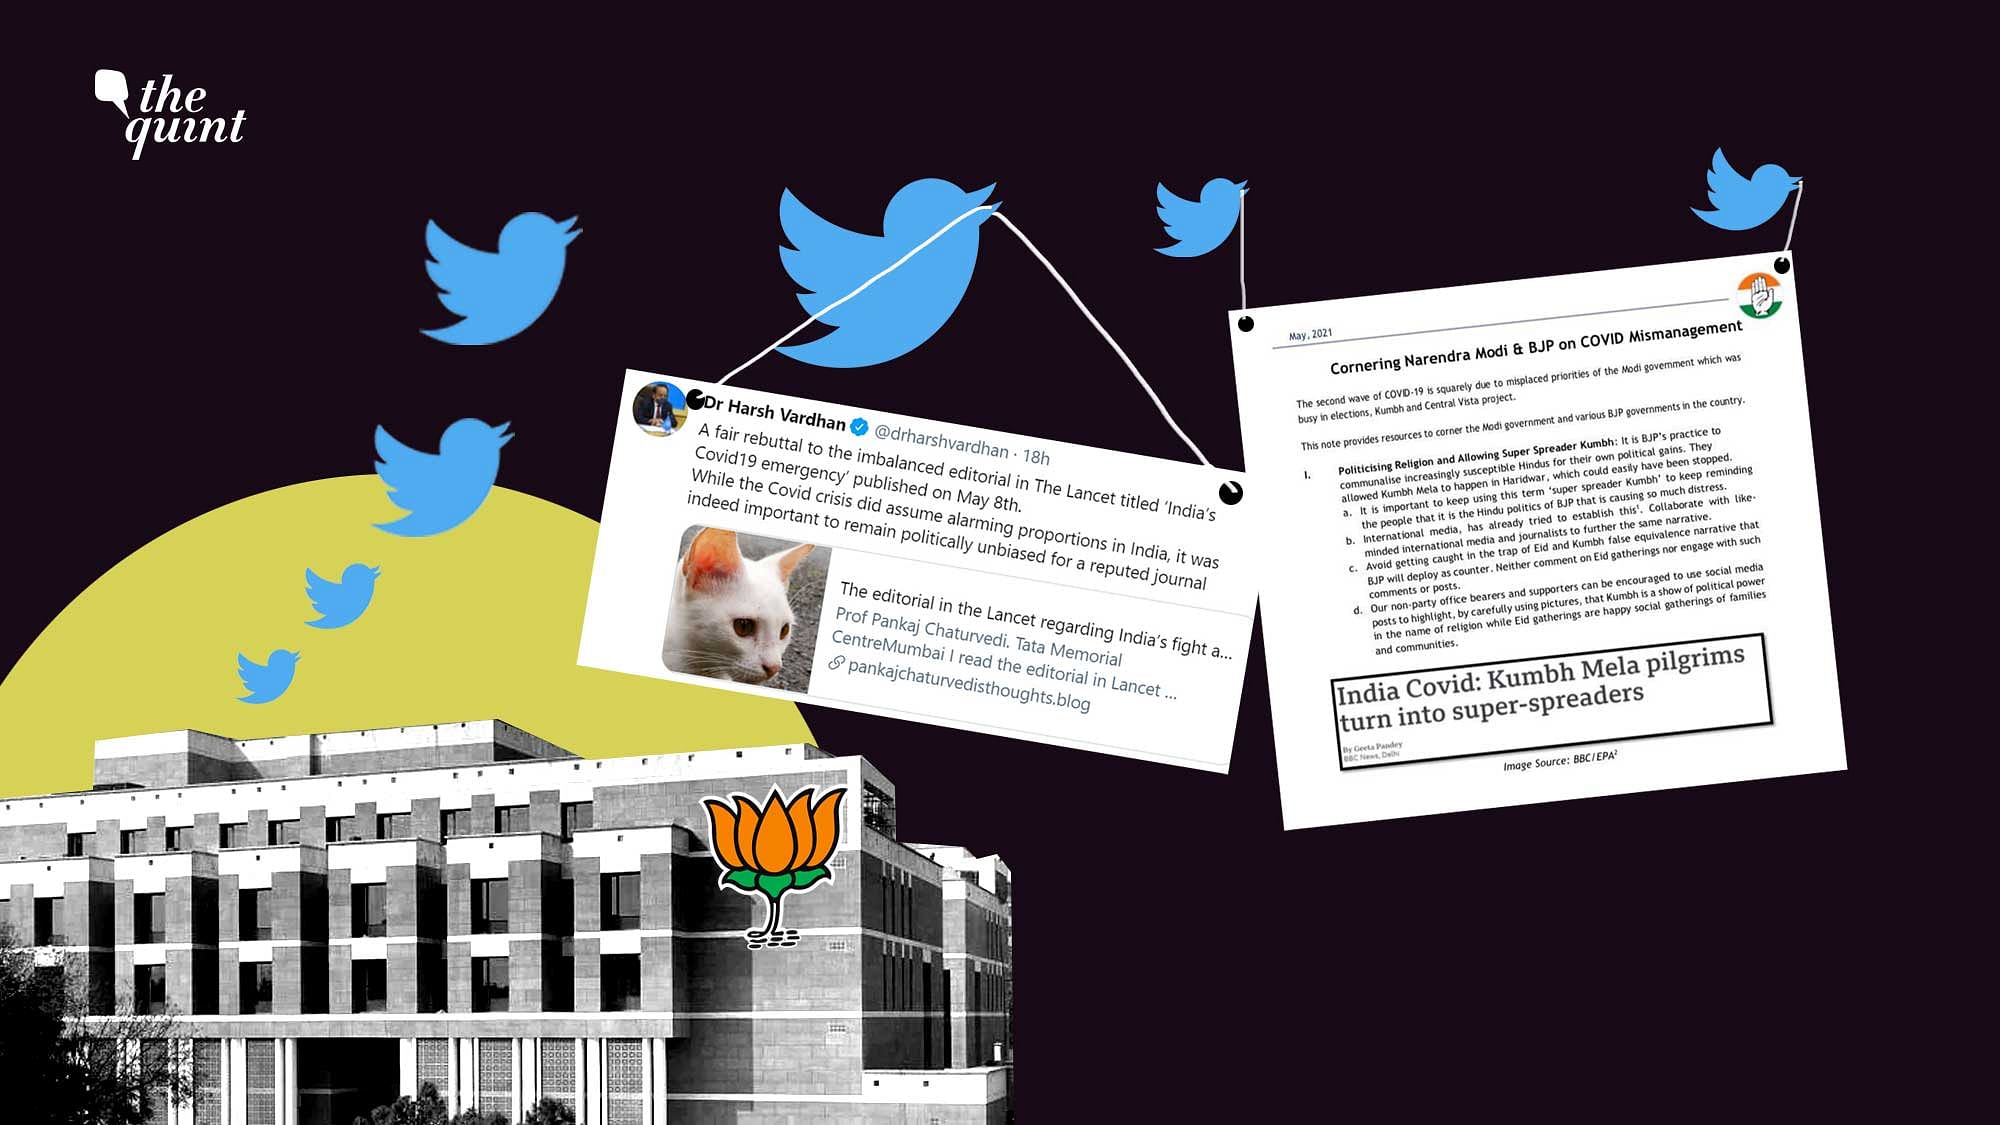 From using unknown blogs to blaming ‘everyone’, BJP has tried every trick to escape criticism.